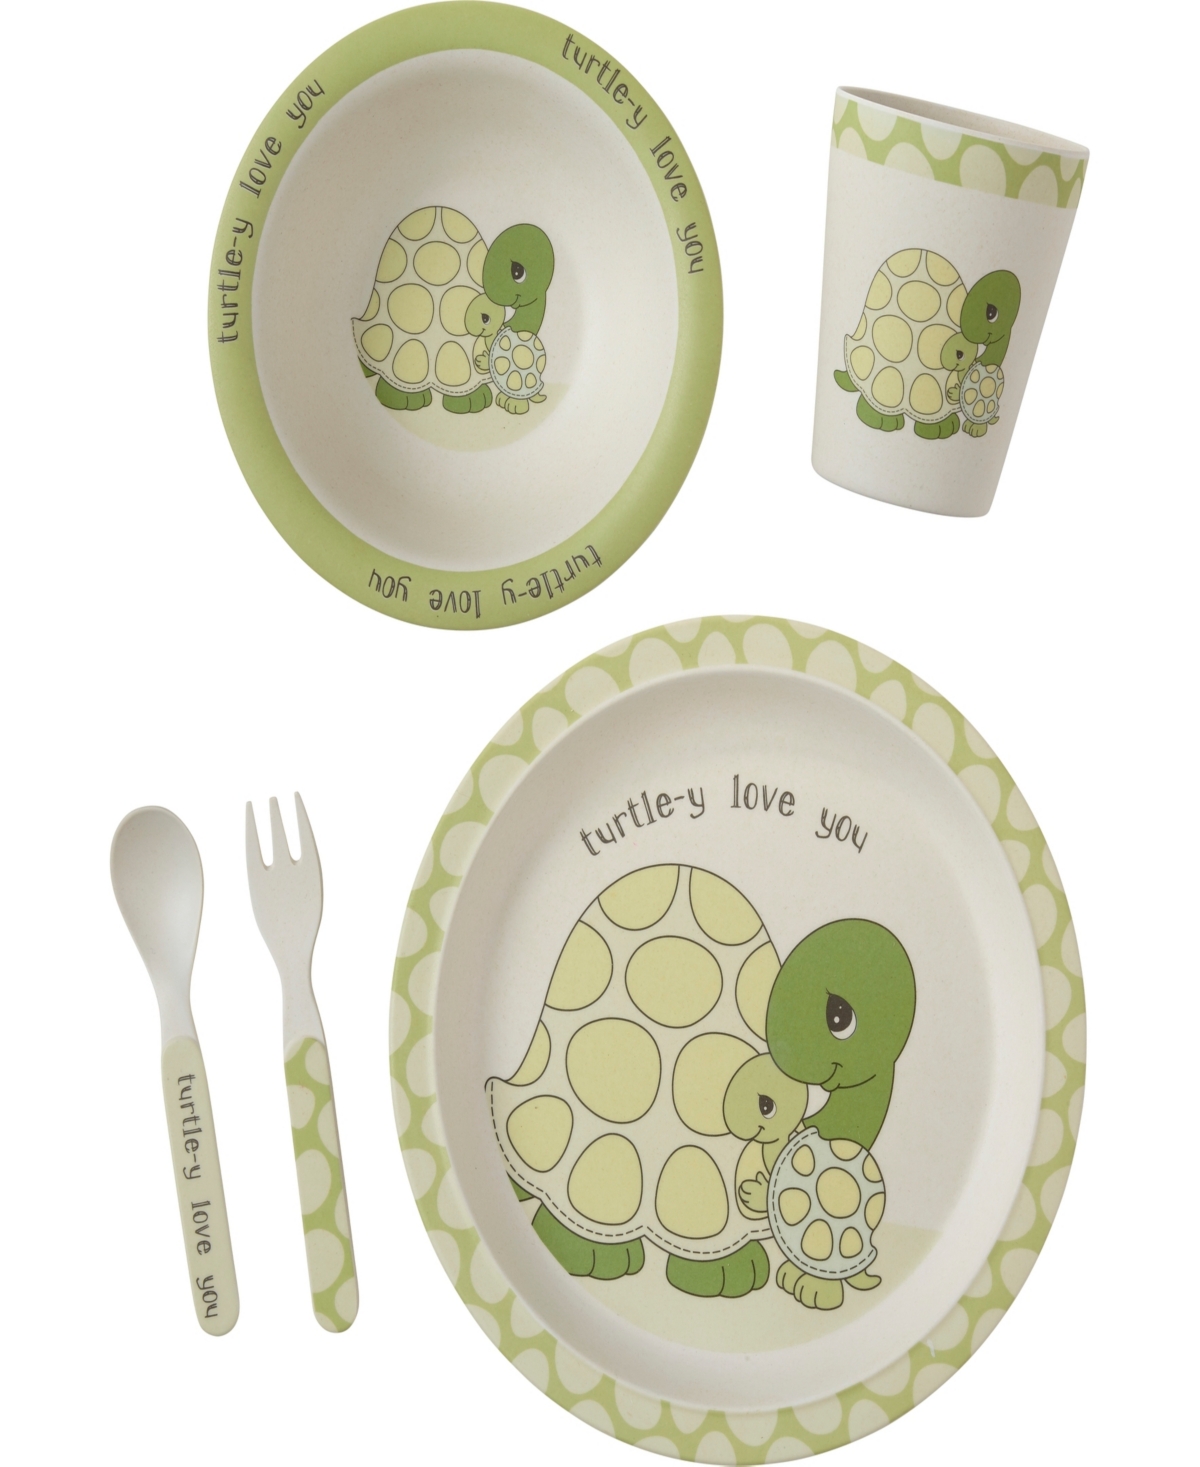 222406 Turtle-y Love You 5-Piece Bamboo Mealtime Gift Set - Multicolored